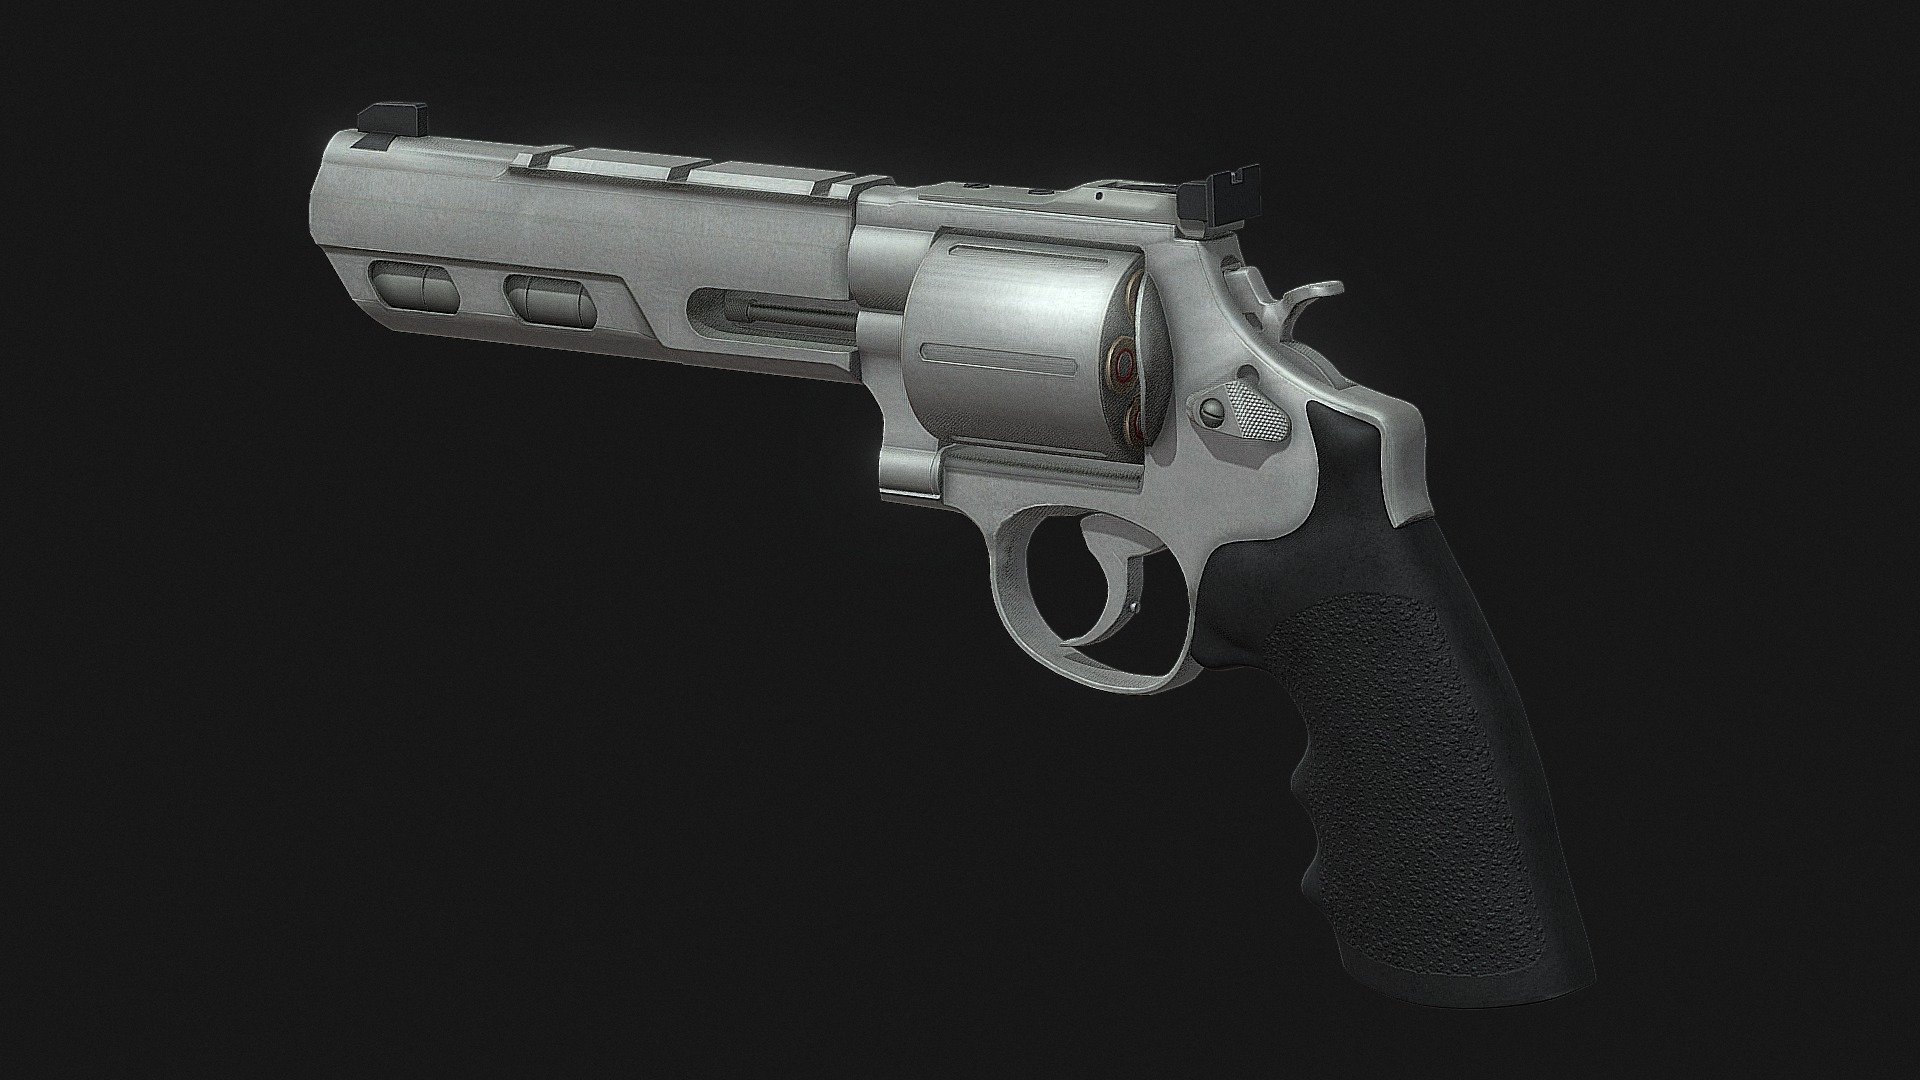 FREE FOR USERS THAT SUPPORT ME ON AHUTC - Revolver Free for my supporters - 3D model by momsboxtv 3d model